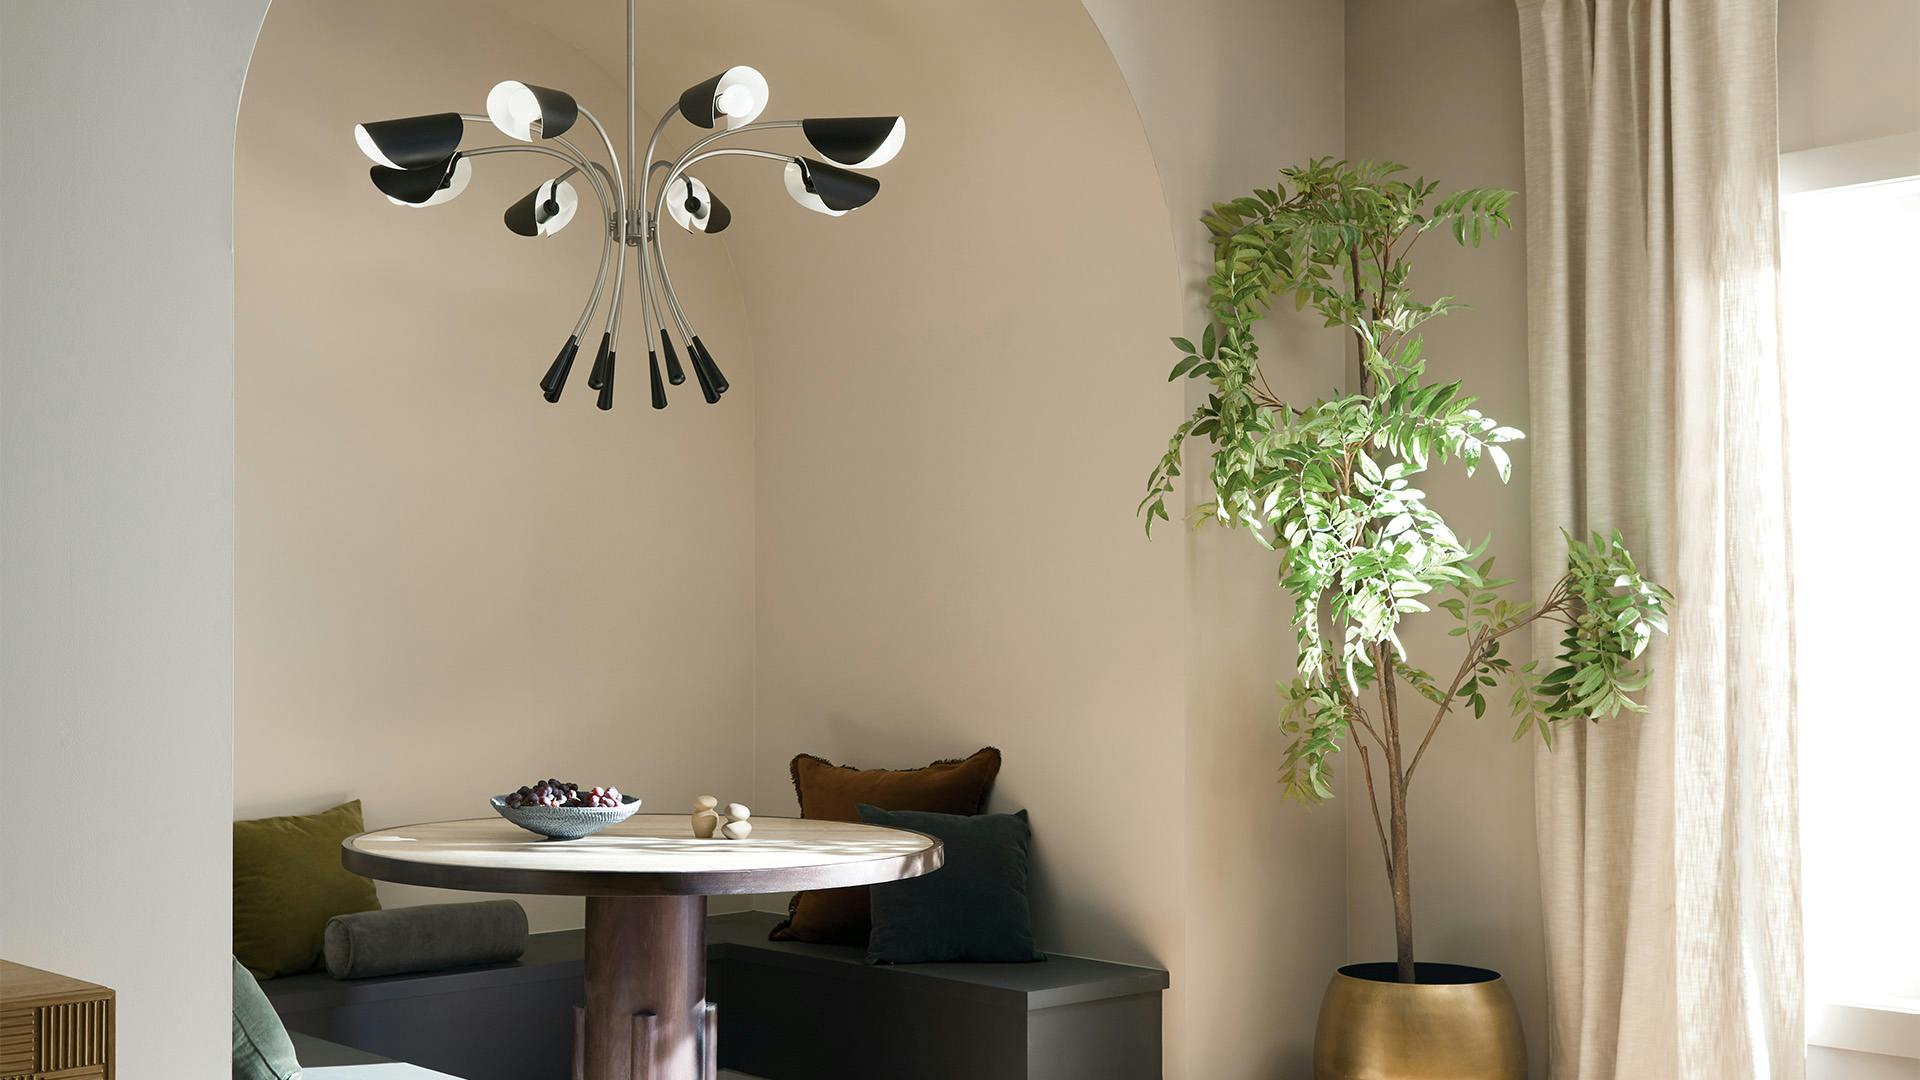 Arcus chandelier hanging over dining table tucked in a nook